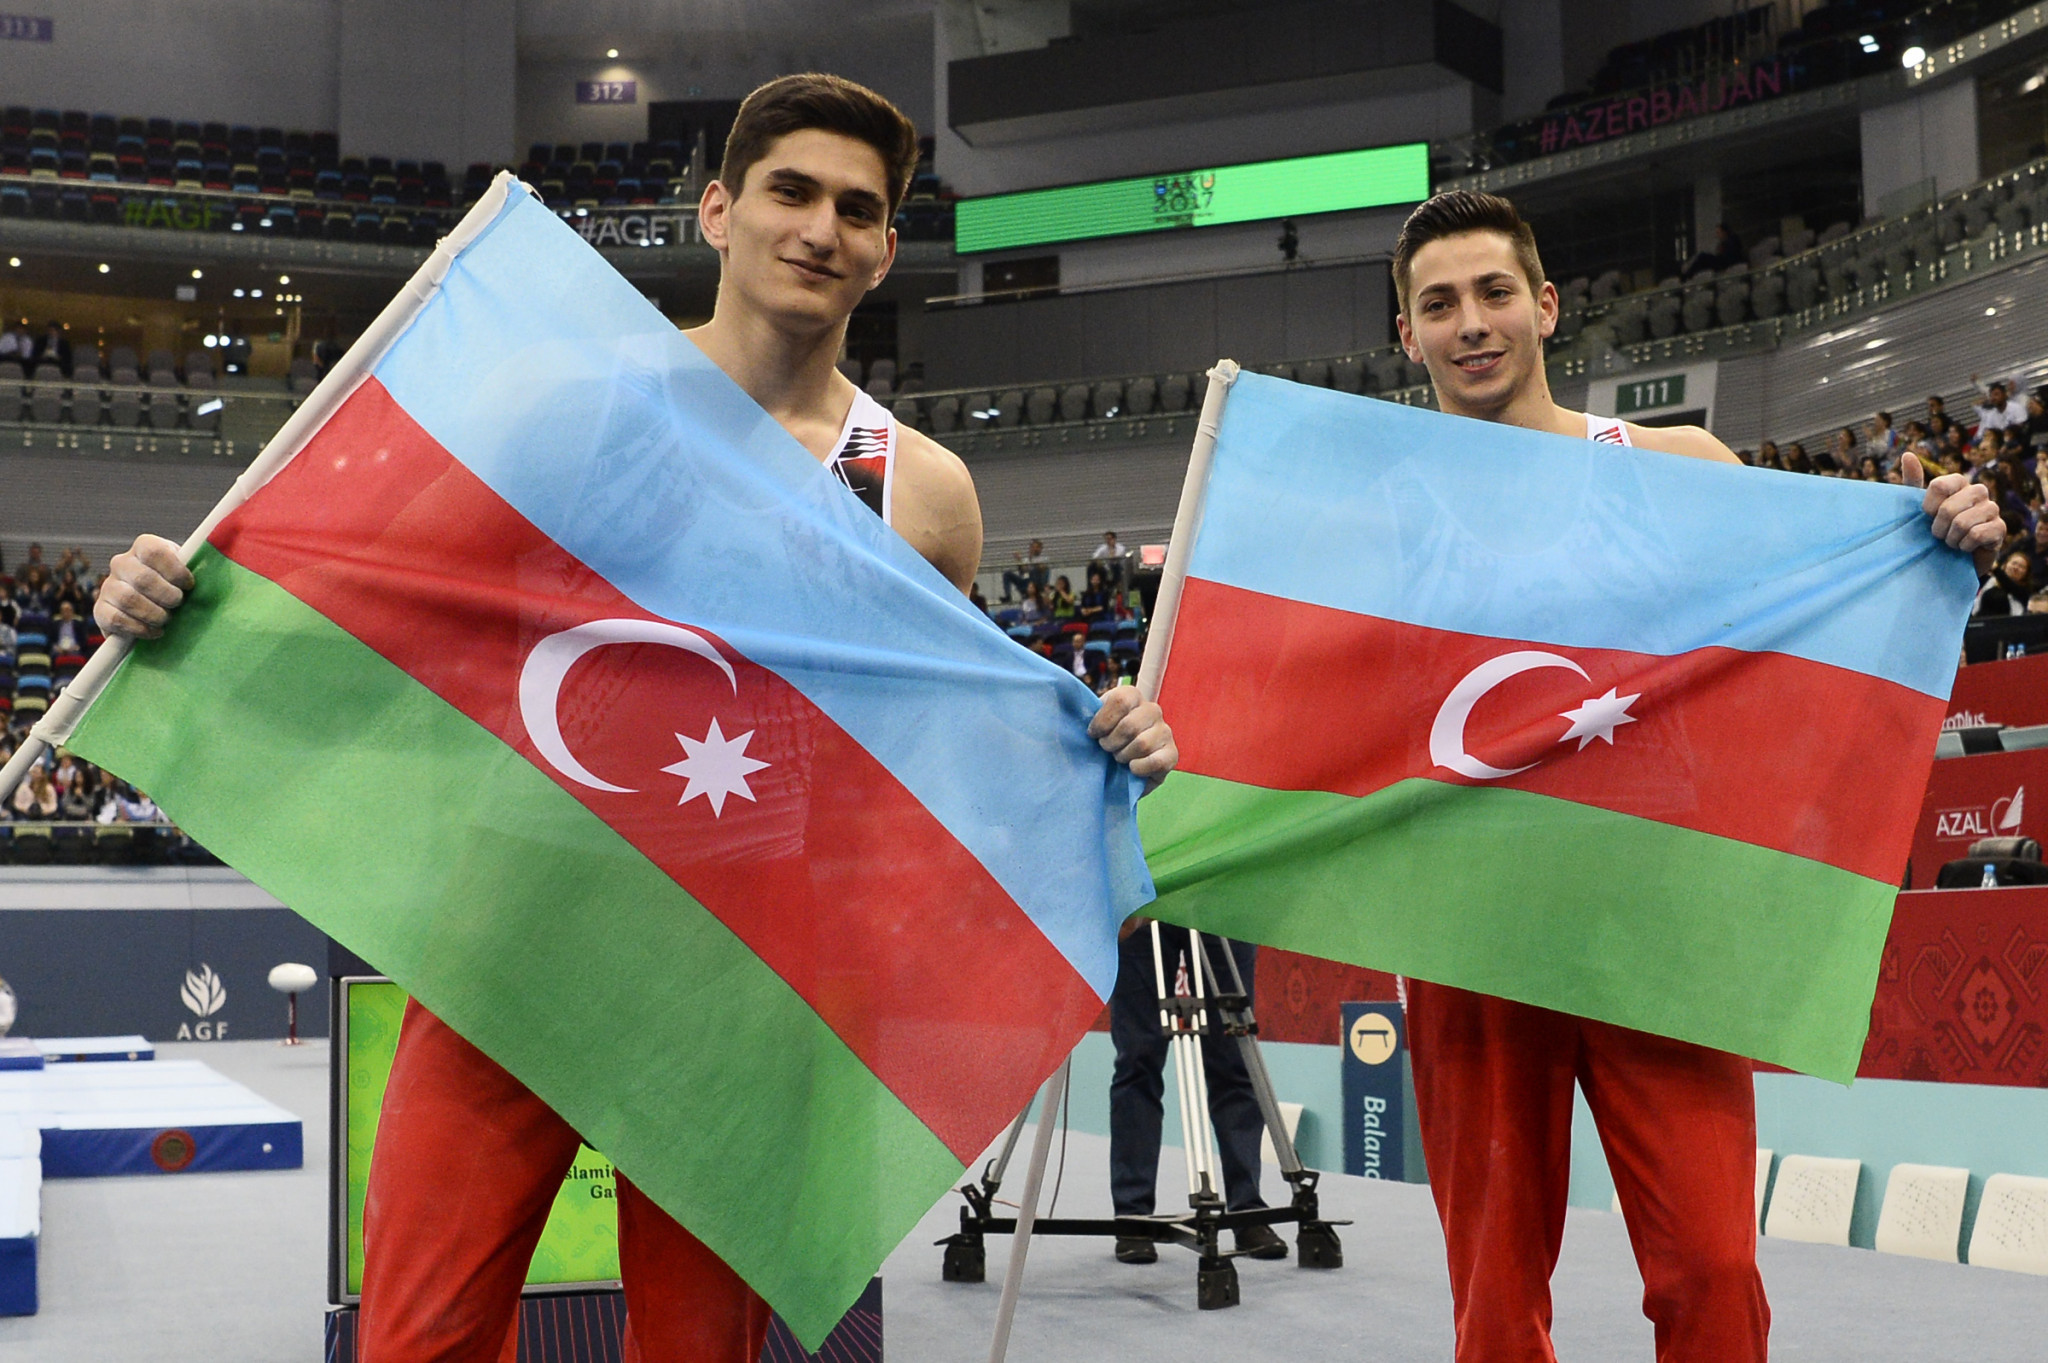 Azerbaijan has become an increasingly prominent gymnastics nation ©Getty Images